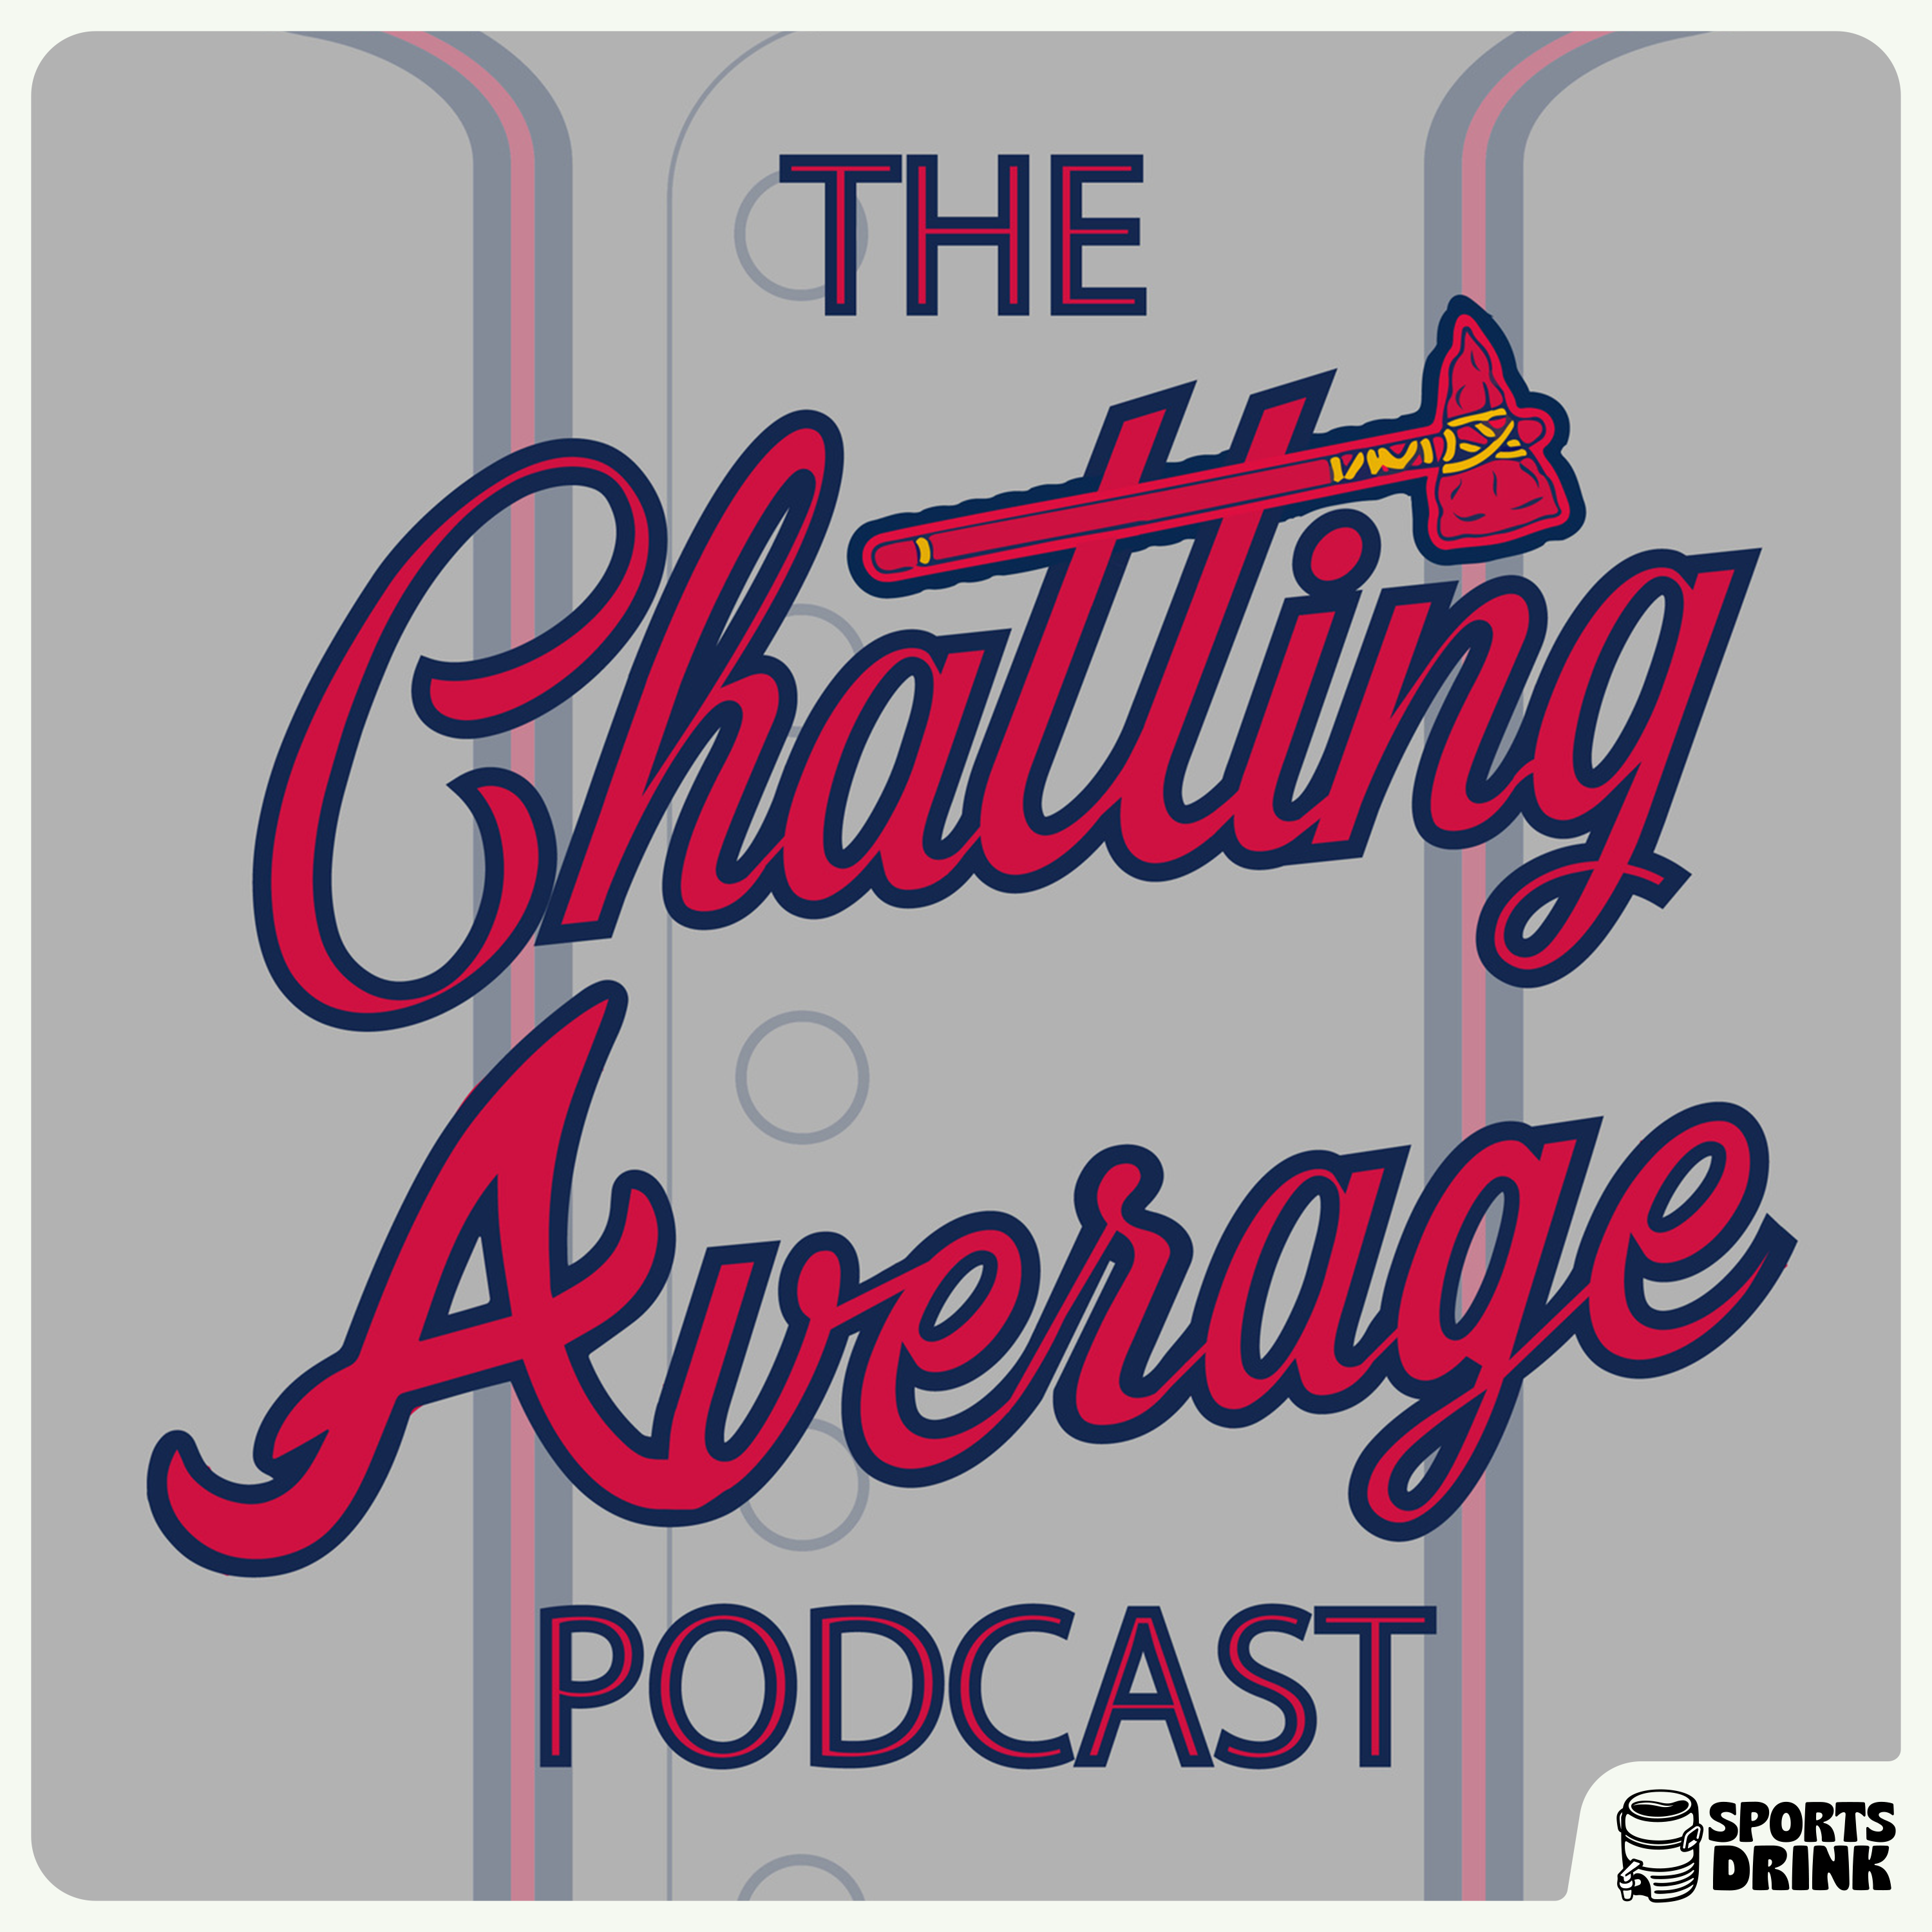 The Chatting Average Podcast